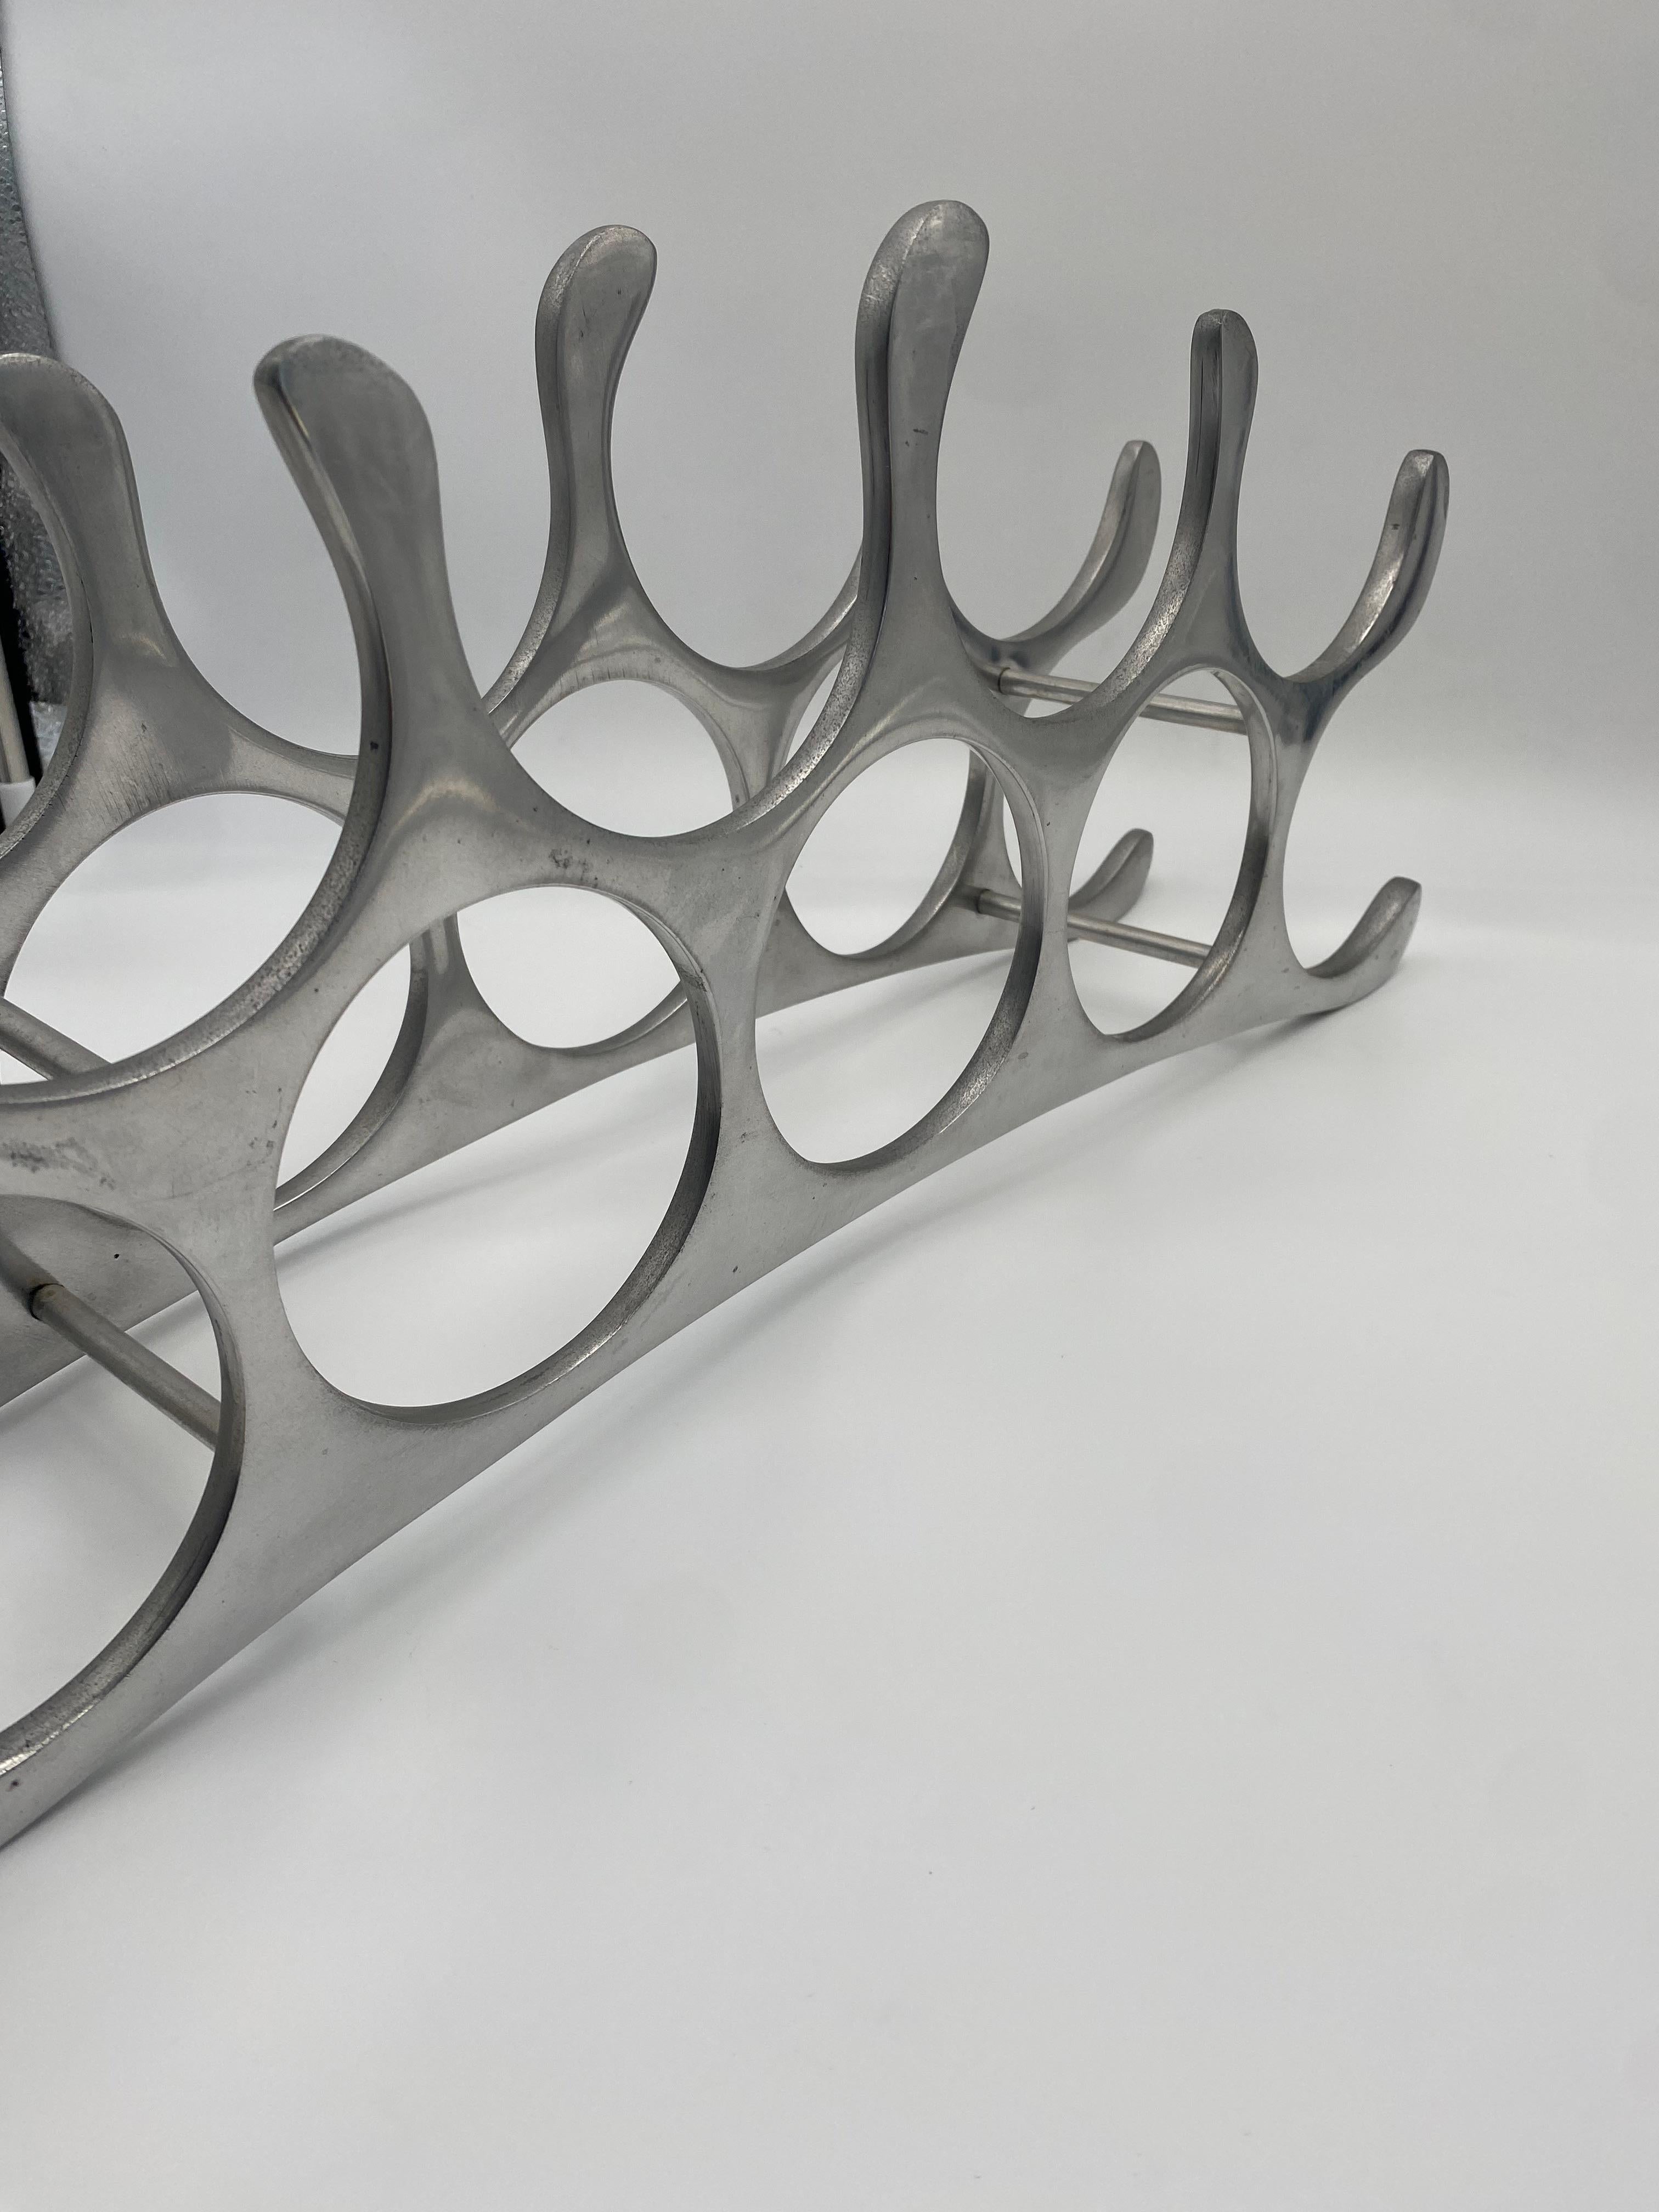 9 Bottle Polished Aluminum Wine Rack By Michael Noll,  Germany 1990s For Sale 4